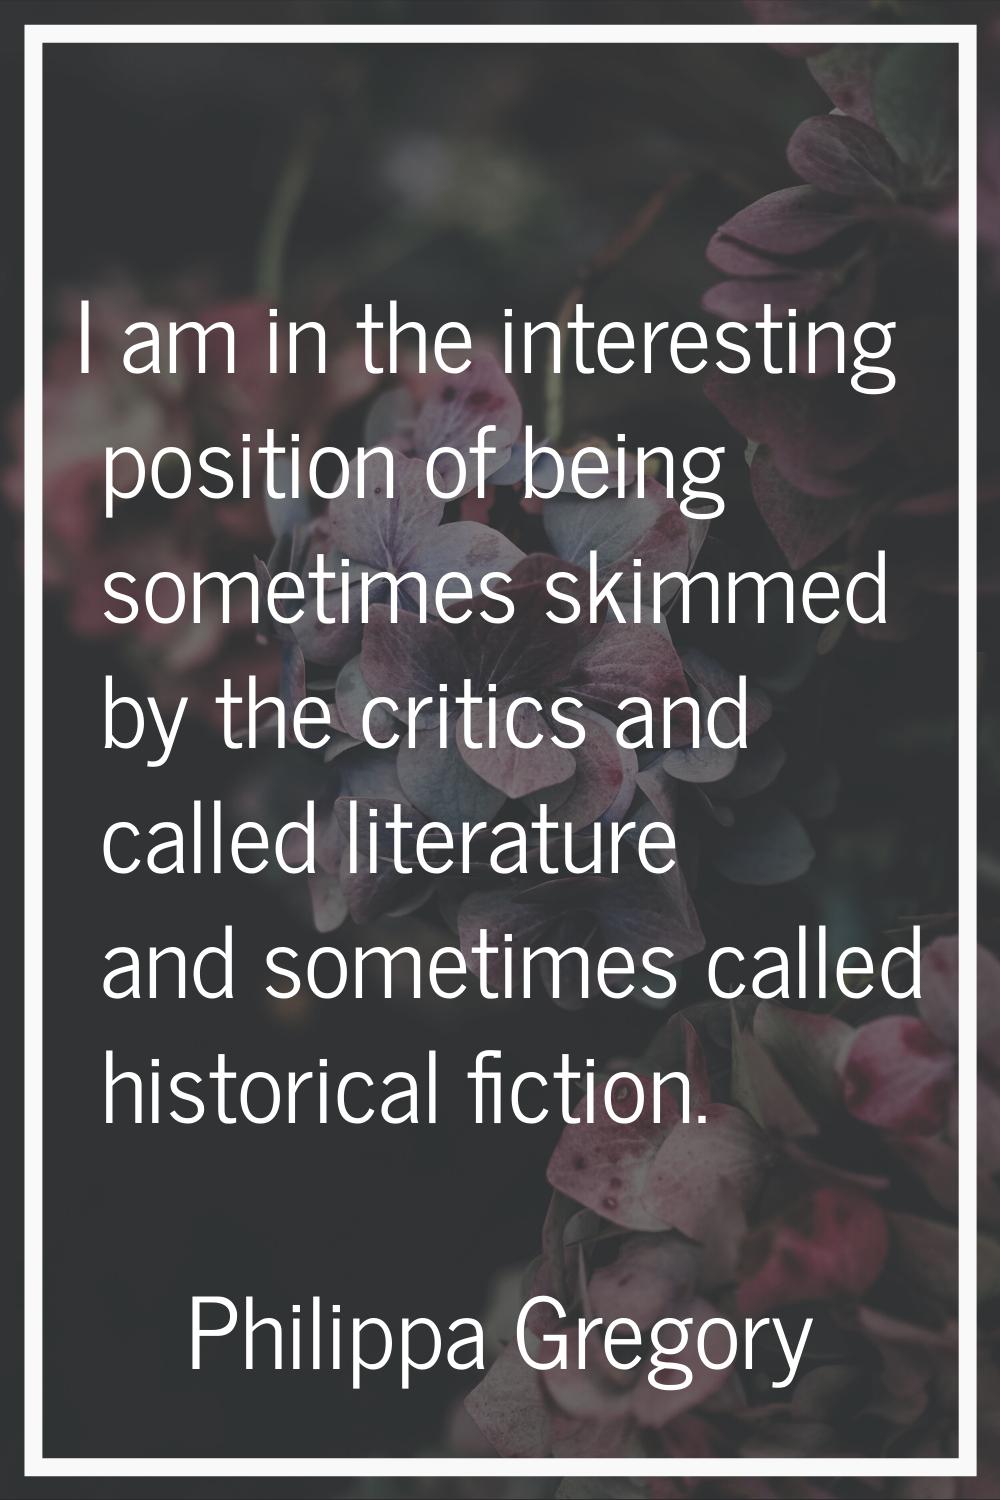 I am in the interesting position of being sometimes skimmed by the critics and called literature an